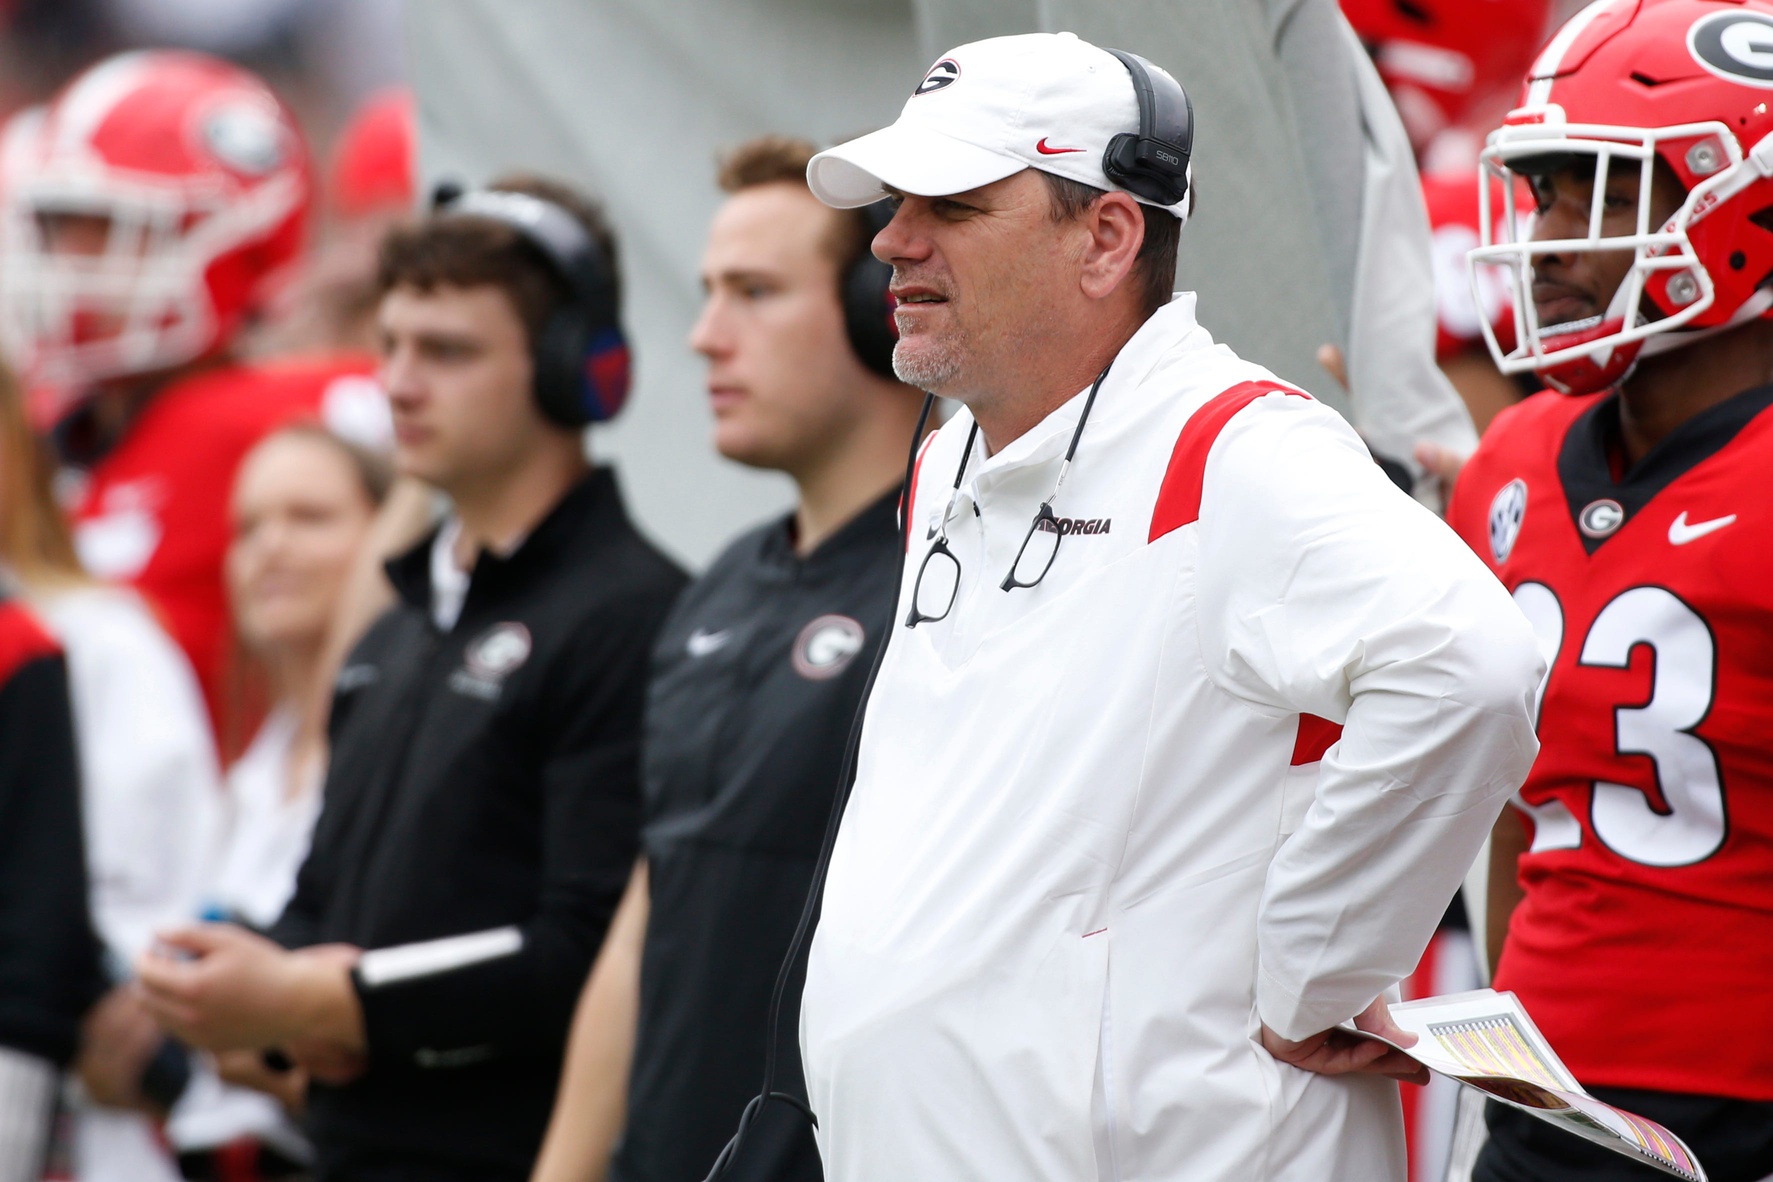 The Georgia Bulldogs open their 2023 Spring practice schedule this week. Here are the three biggest questions we would like answered.